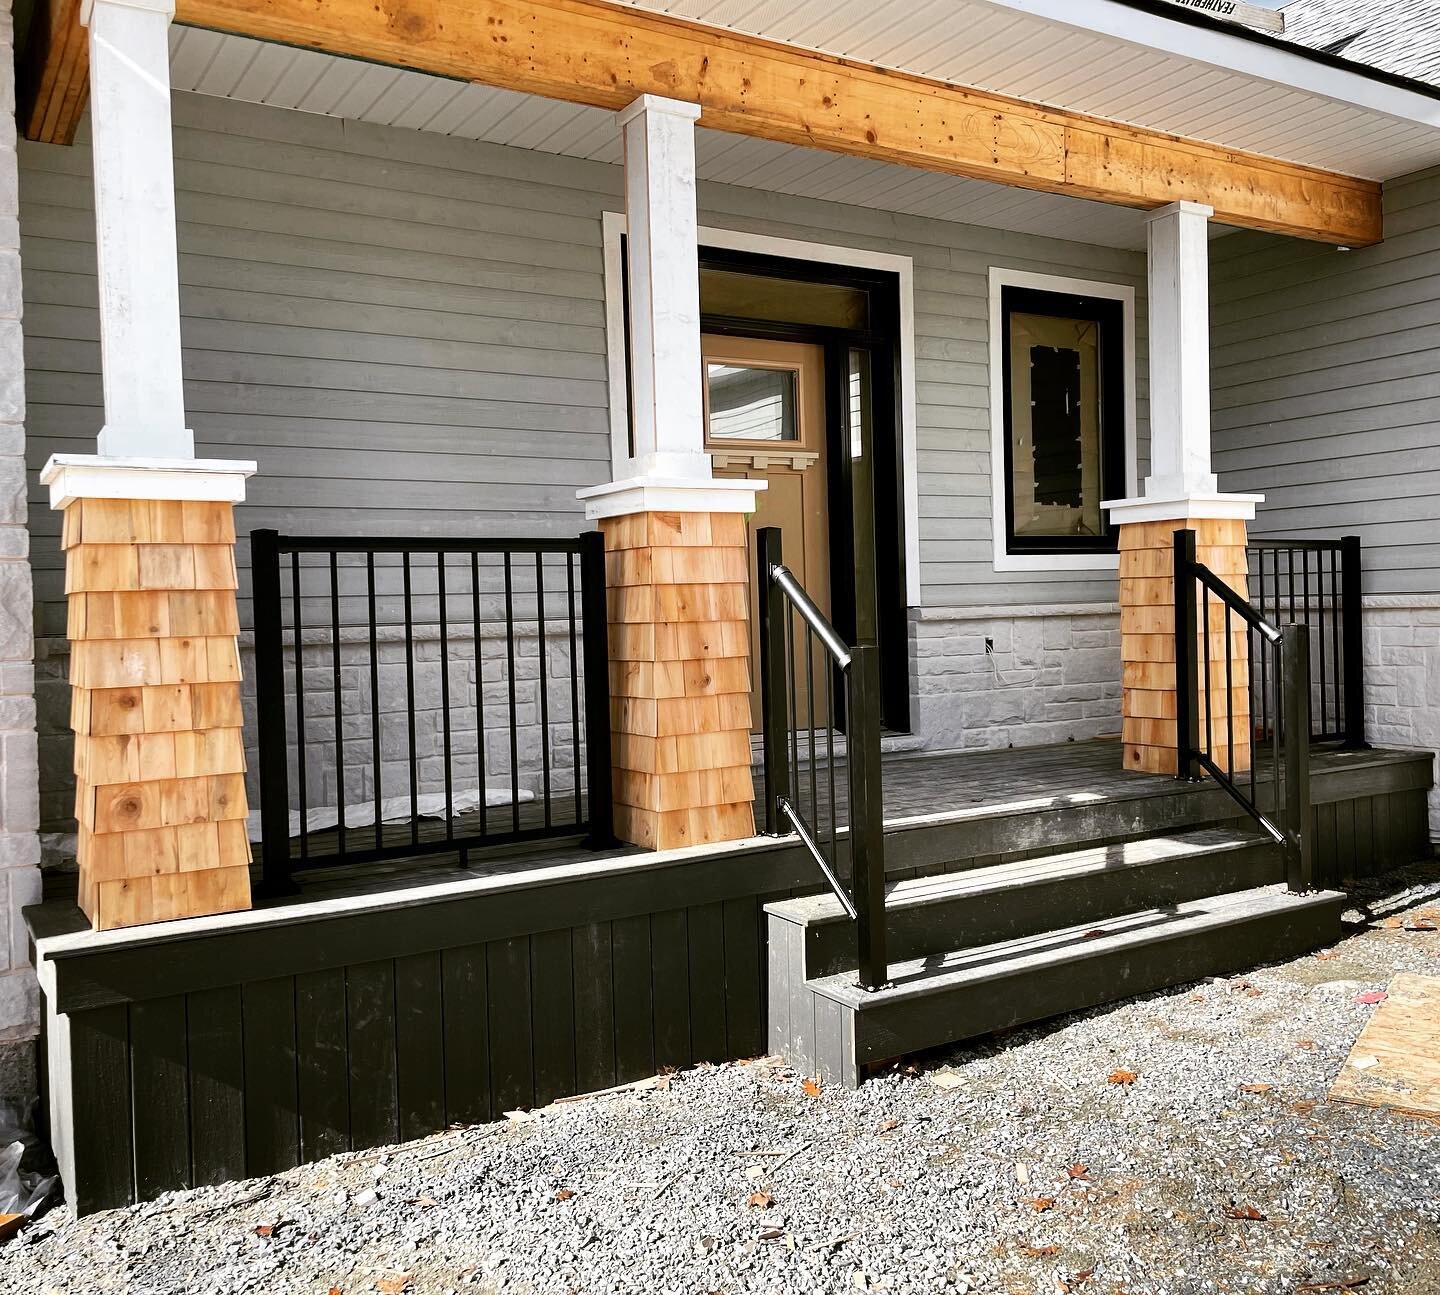 Now that&rsquo;s some curb appeal! Beautiful cedar shake post bases with cape cod wood post wraps, trex composite decking and century aluminum railings. 
#customcarpentry #deckbuilder #cedarshakes #compositedecking #aluminumrailing